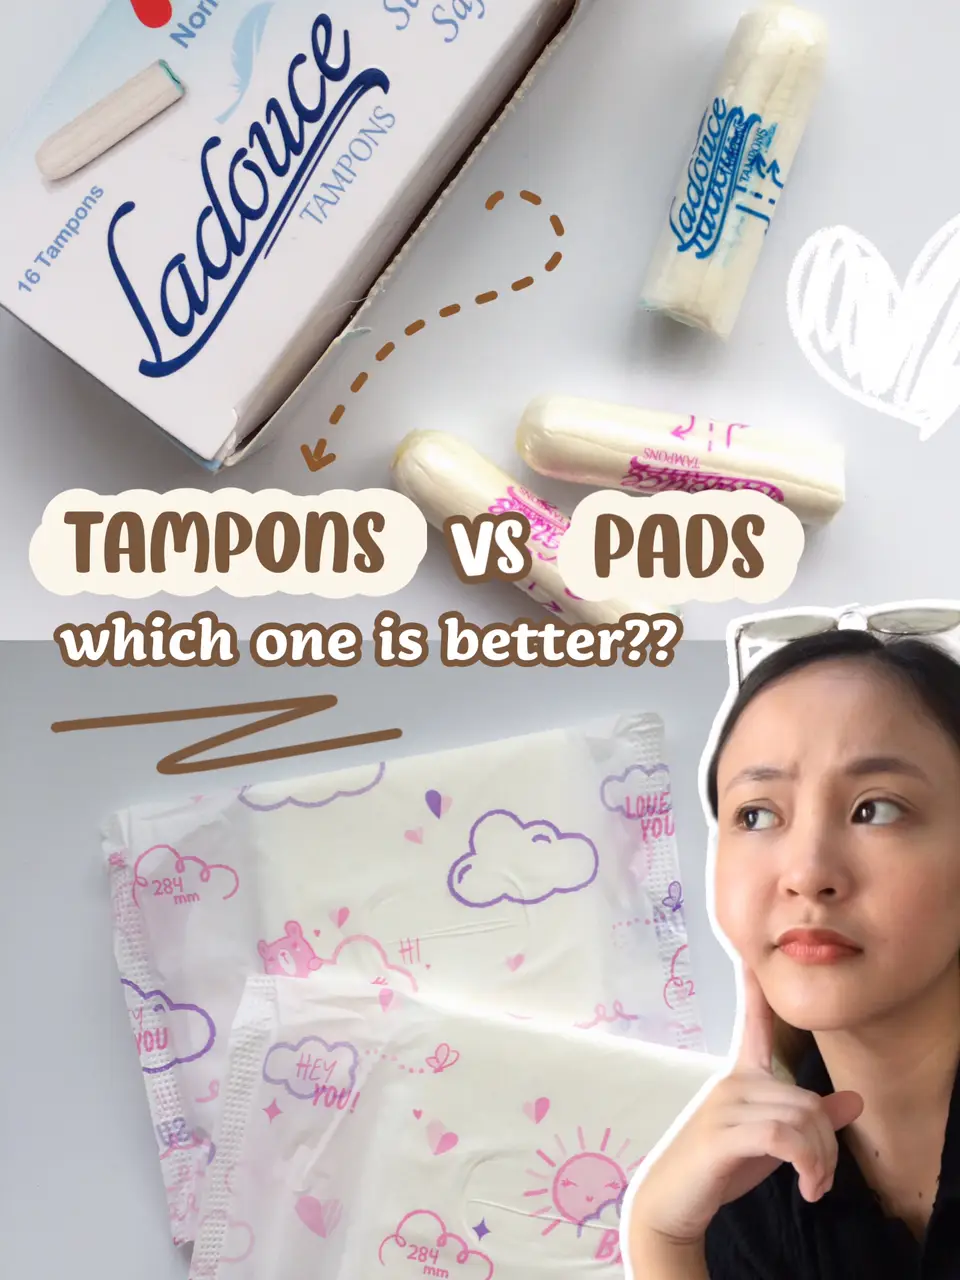 Can You Wear Tampons in A Swimming Pool - Lemon8 Search